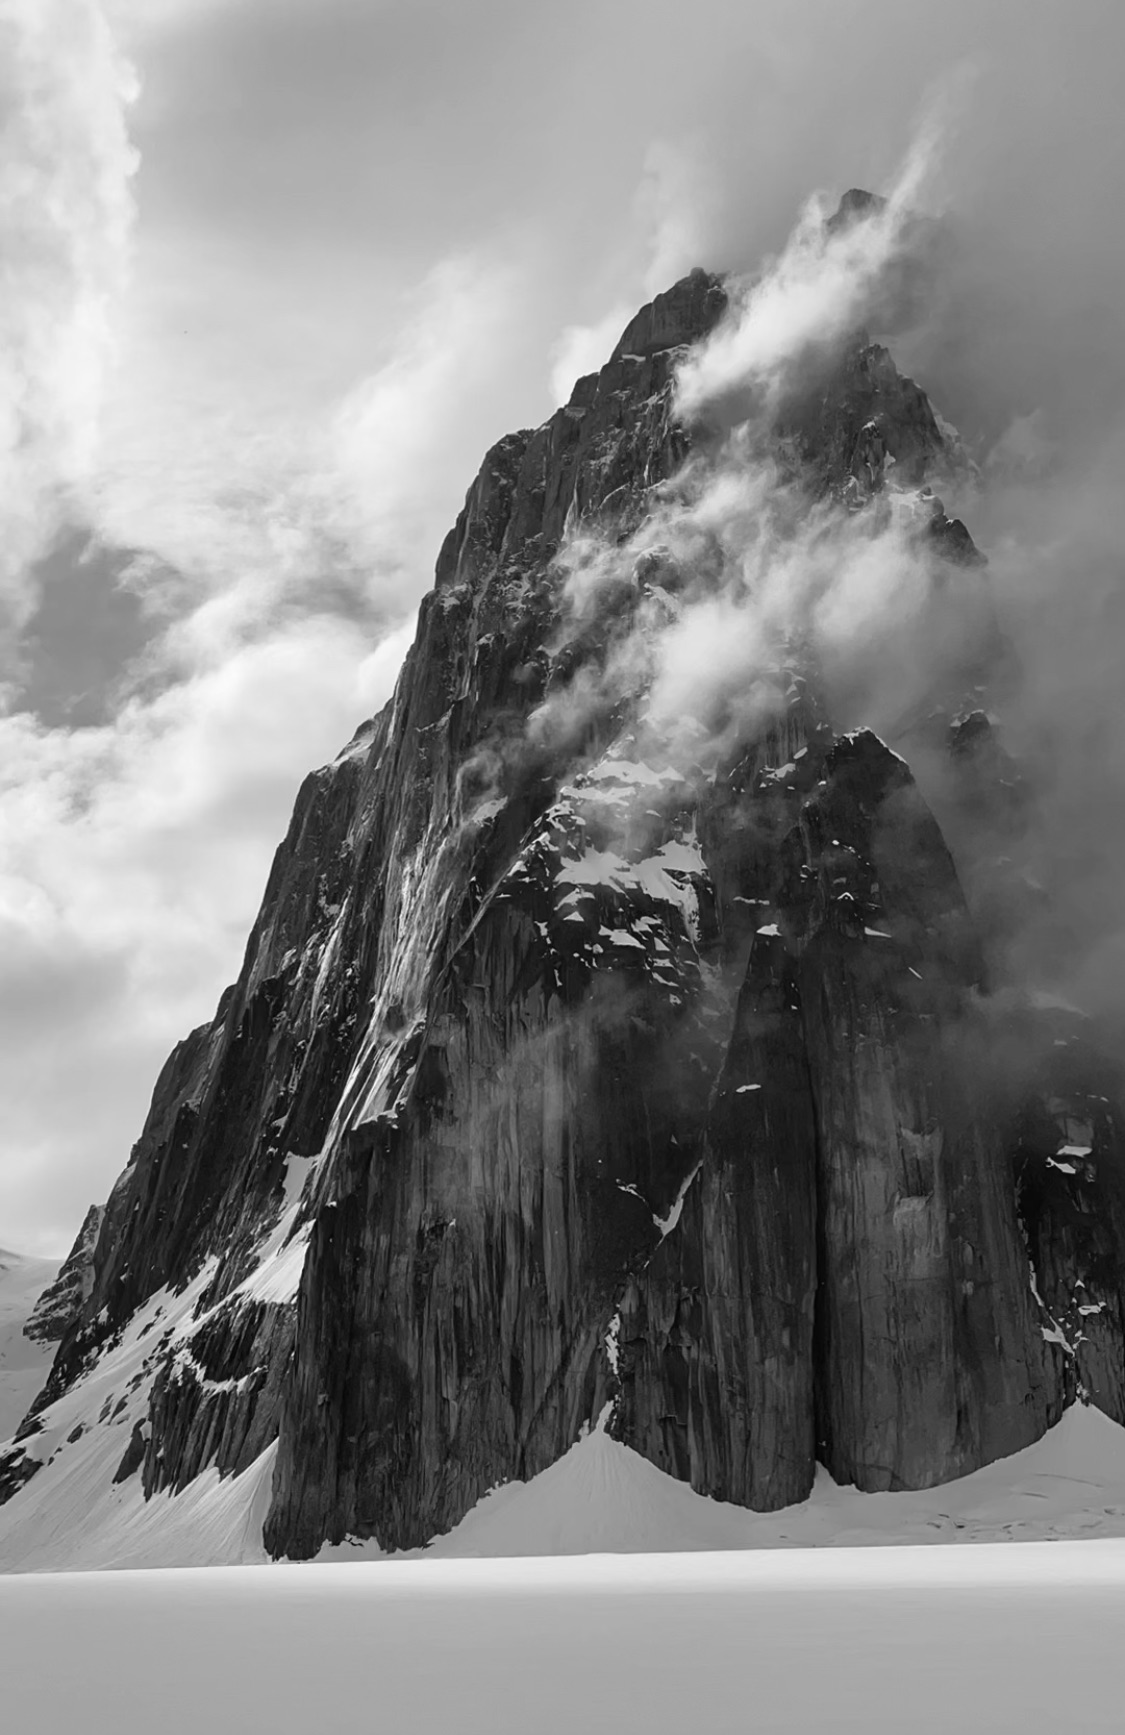 Black and white image of a cloud-shrouded rocky peak